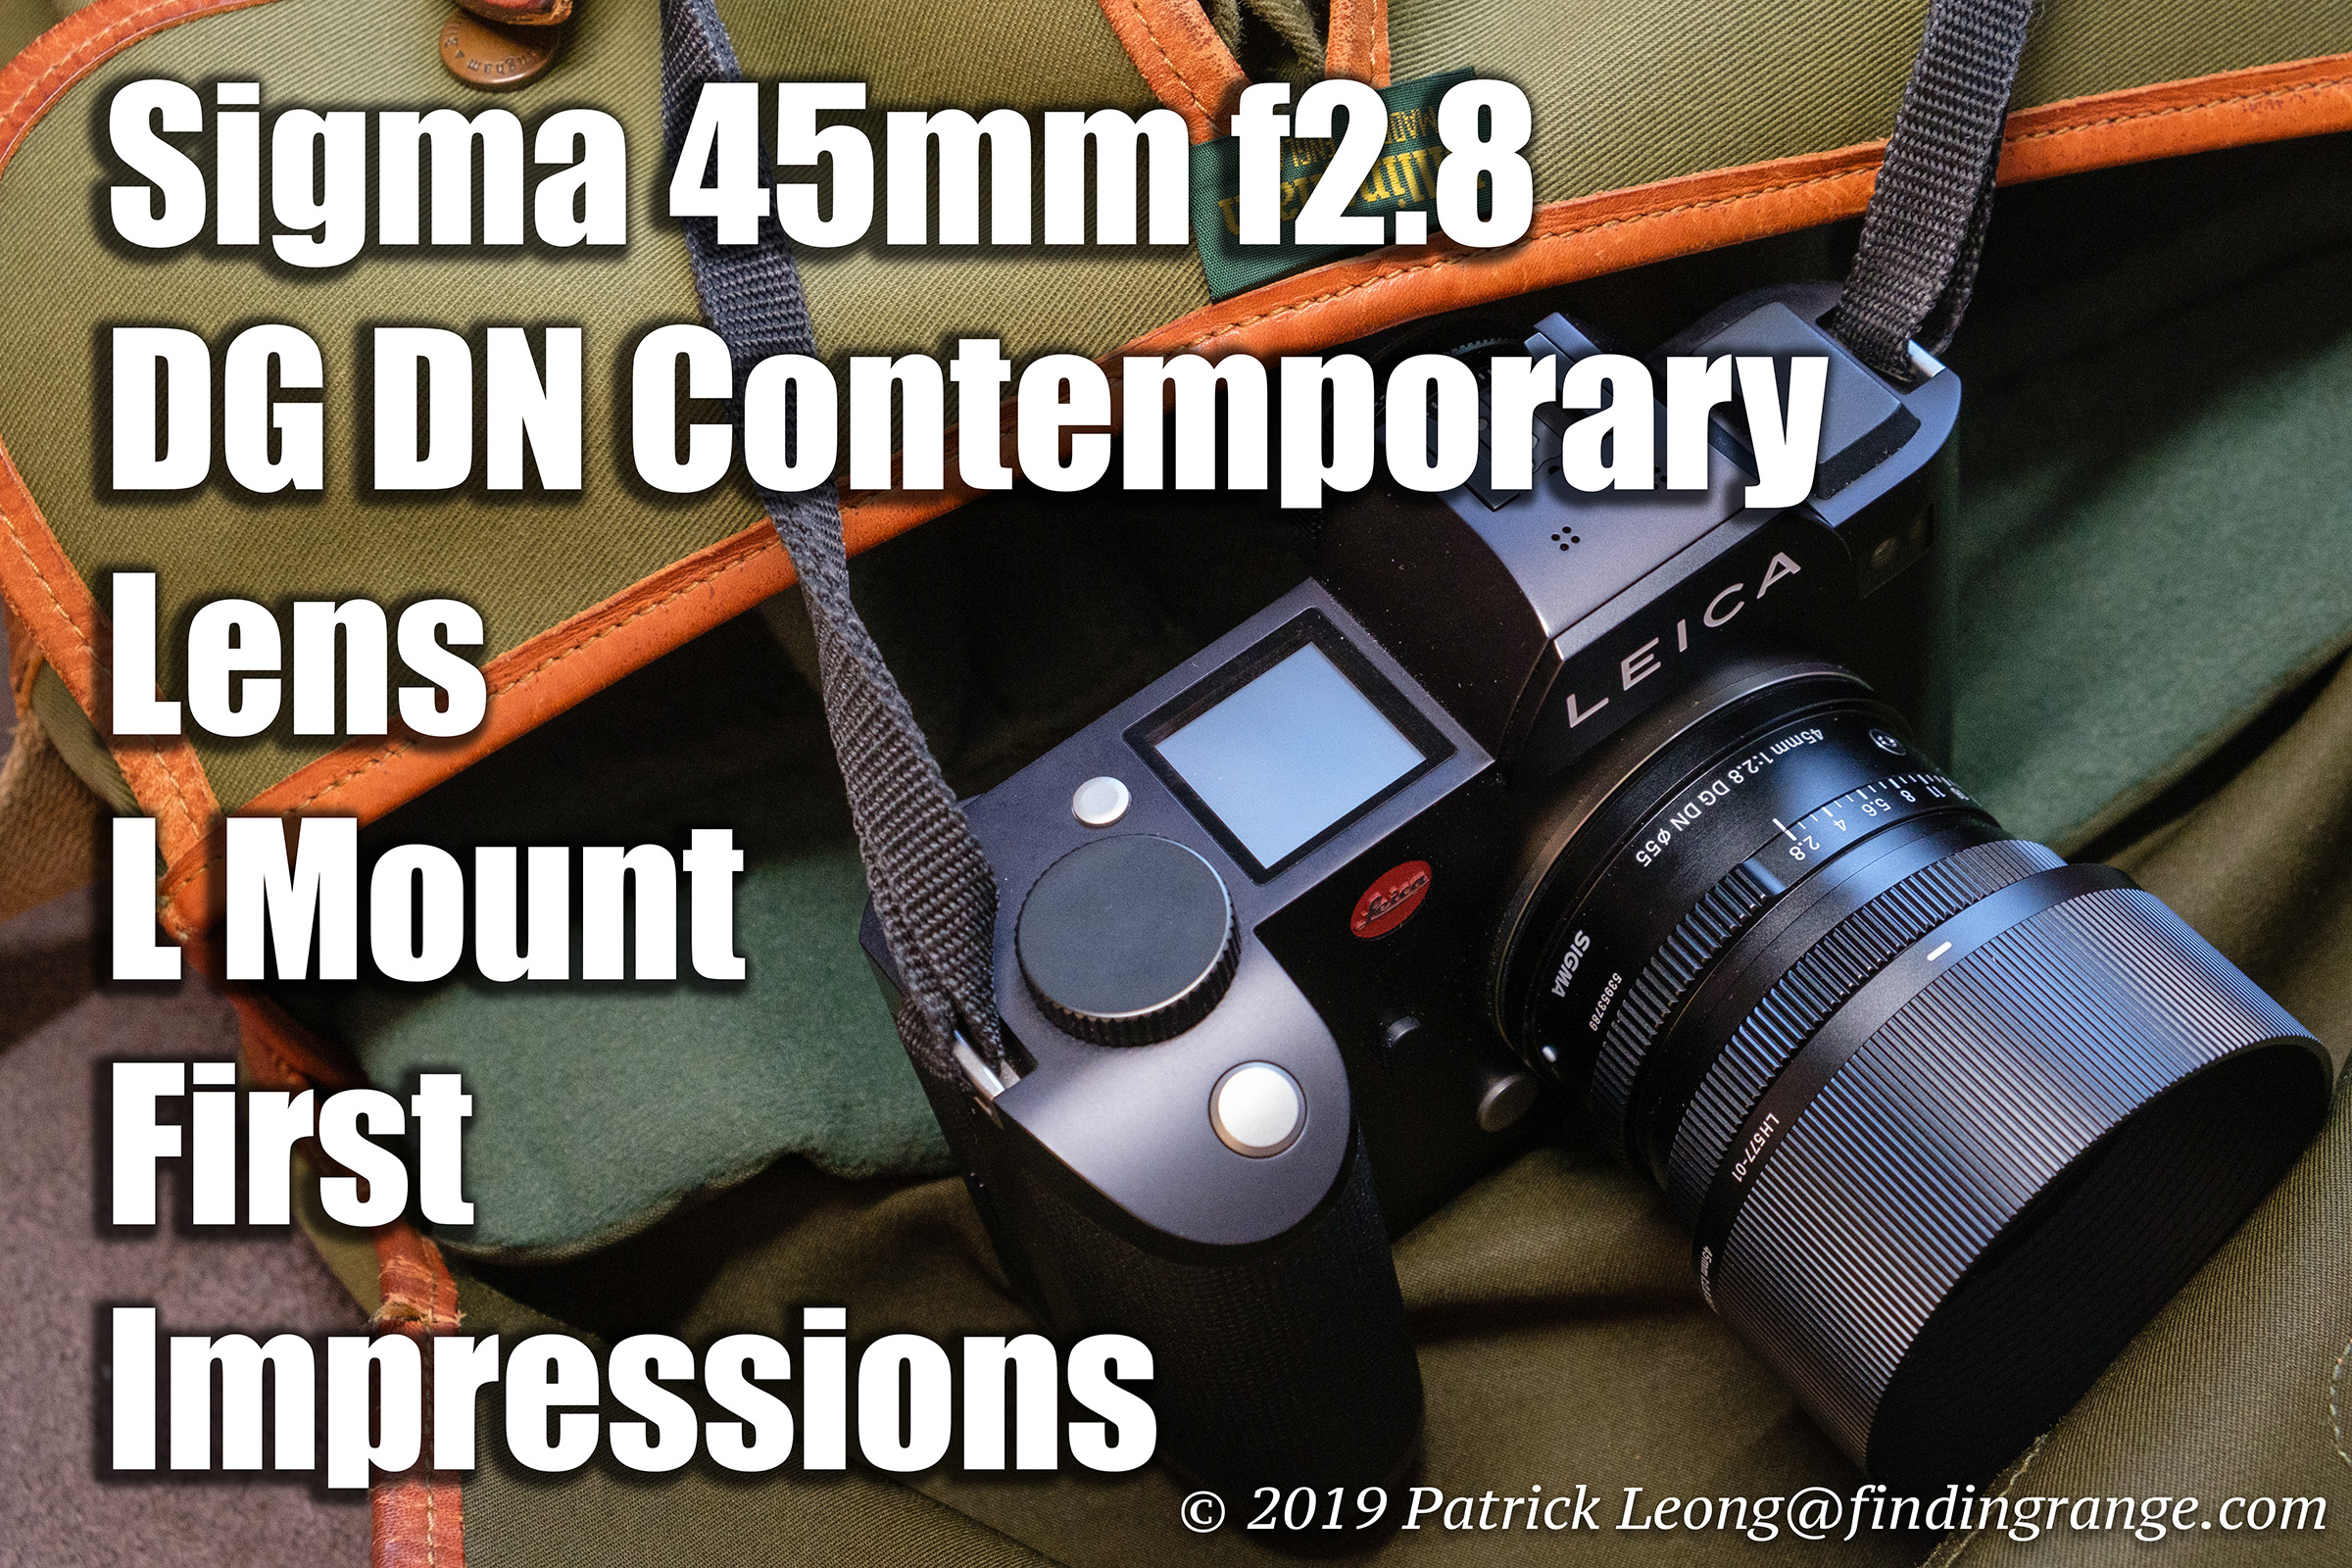 Sigma 45mm f2.8 DG DN Contemporary Lens L Mount First 